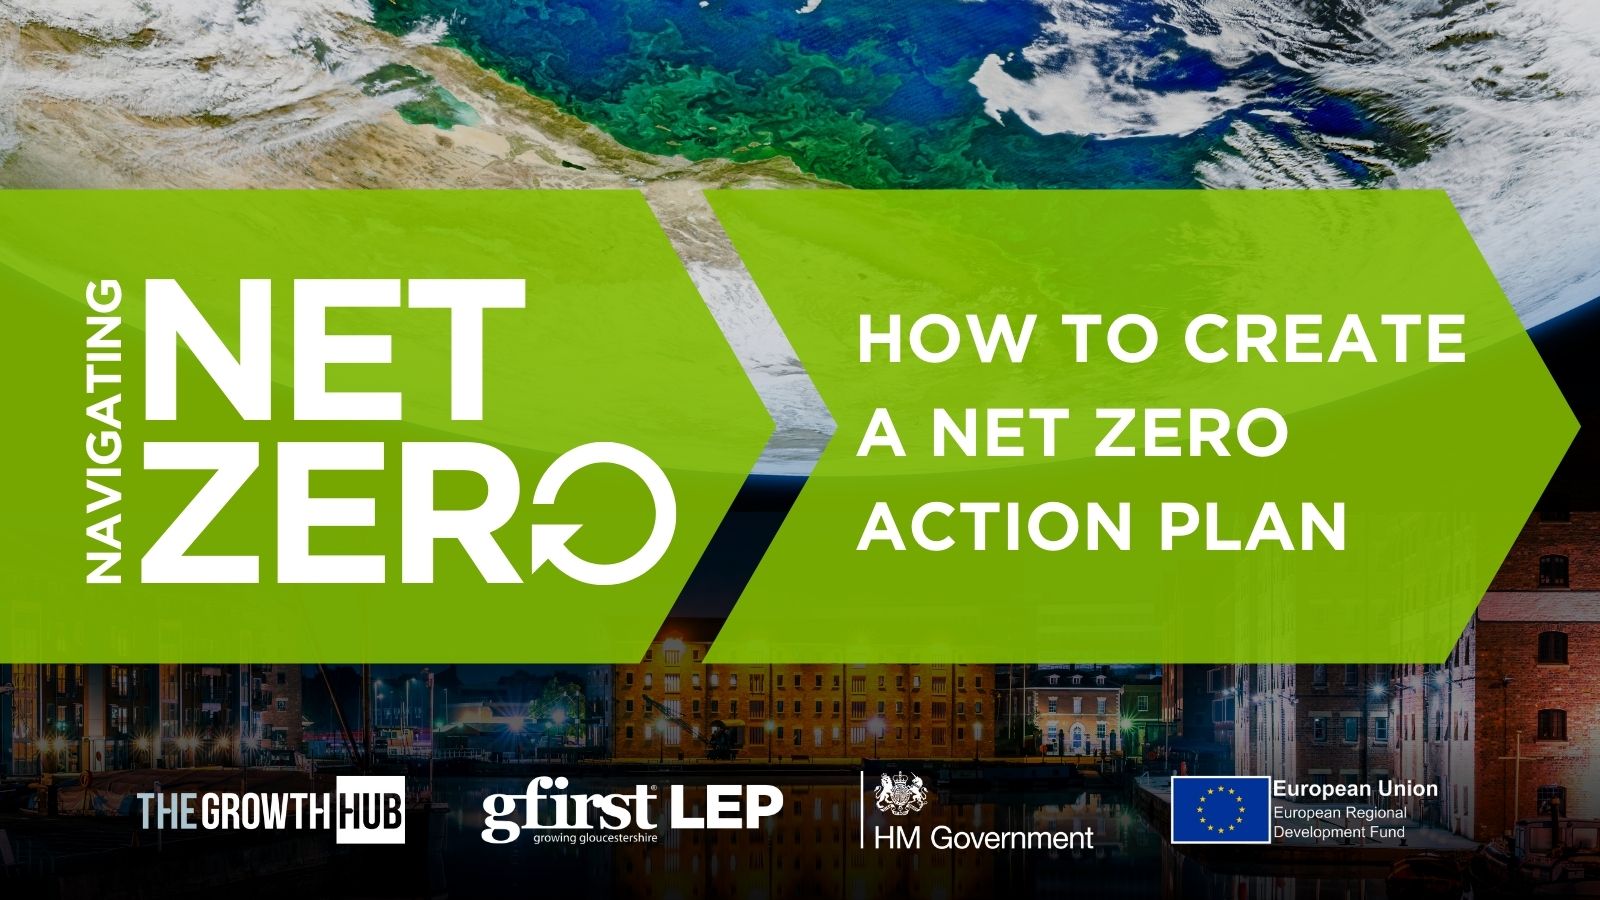 How to create a Net Zero action plan - The Growth Hub